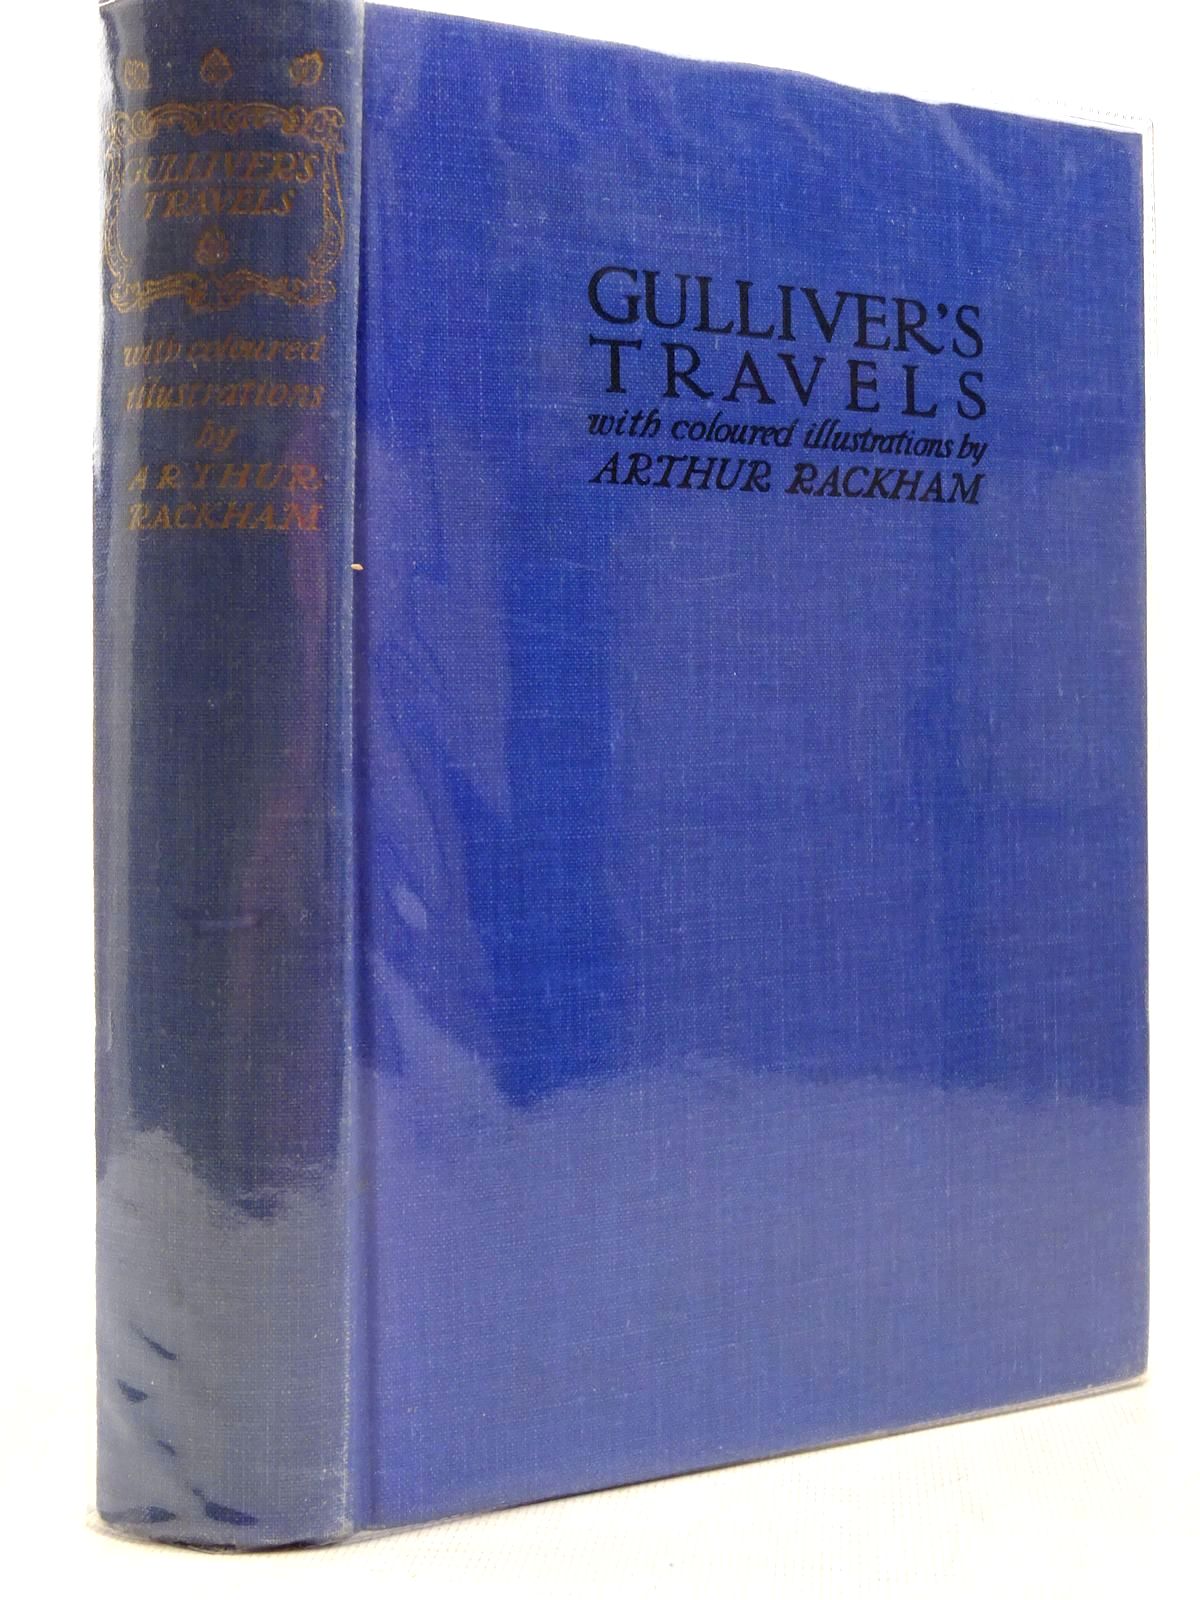 Photo of GULLIVER'S TRAVELS written by Swift, Jonathan illustrated by Rackham, Arthur published by Temple Press (STOCK CODE: 2129119)  for sale by Stella & Rose's Books